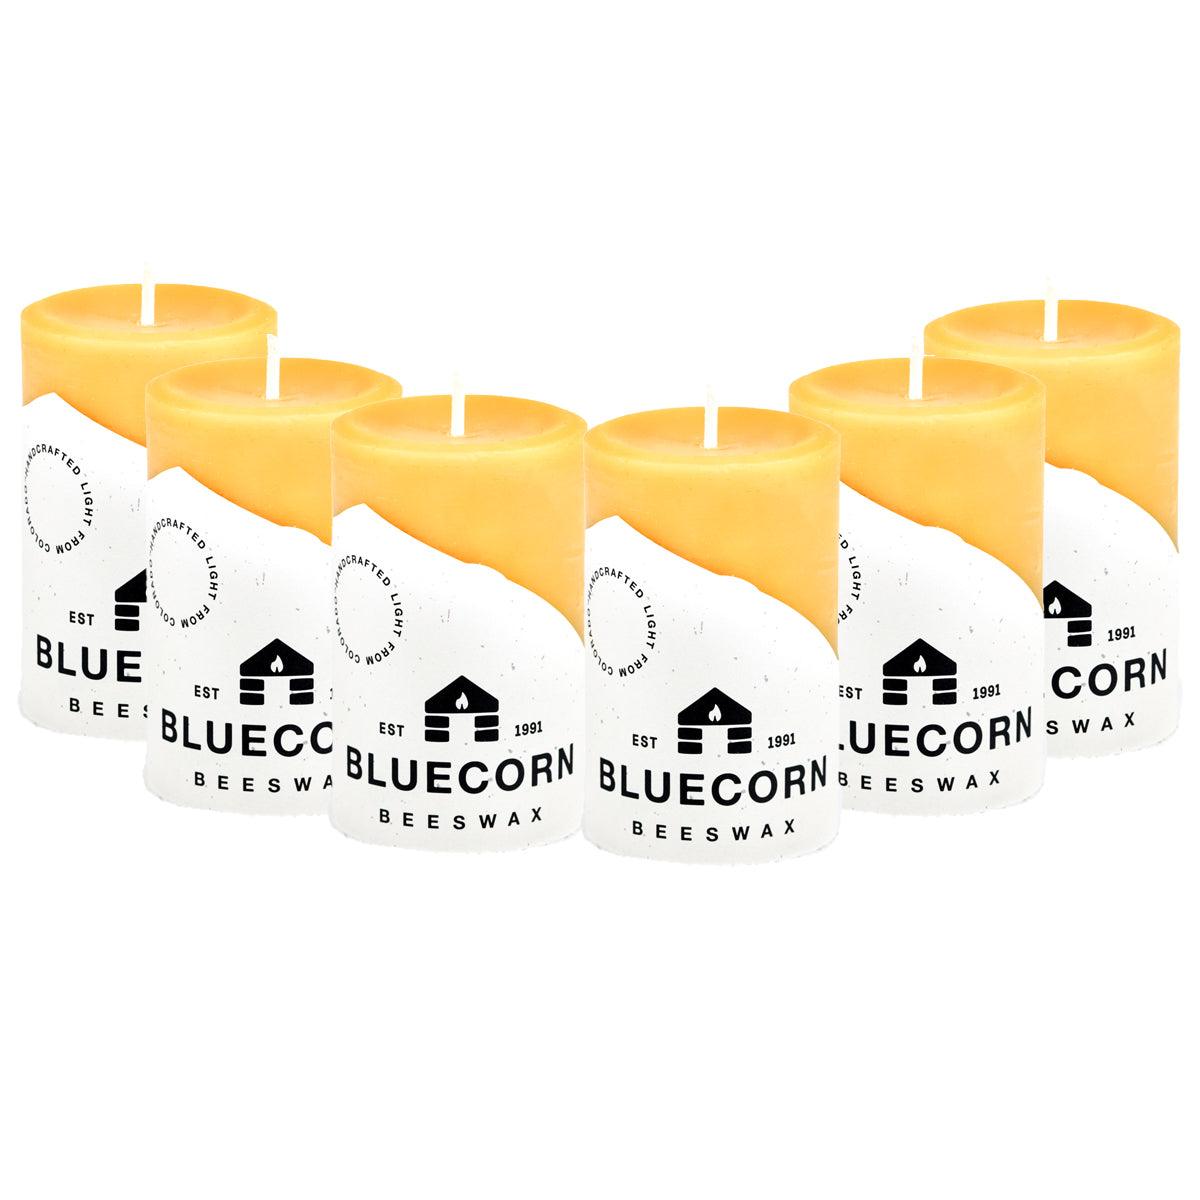 Bluecorn Beeswax 100% Pure Beeswax Votive Candles | Natural Beeswax  Candles, Yellow Raw Beeswax Votives, 4-Pack | Long Burn (12+ Hours) | Soy